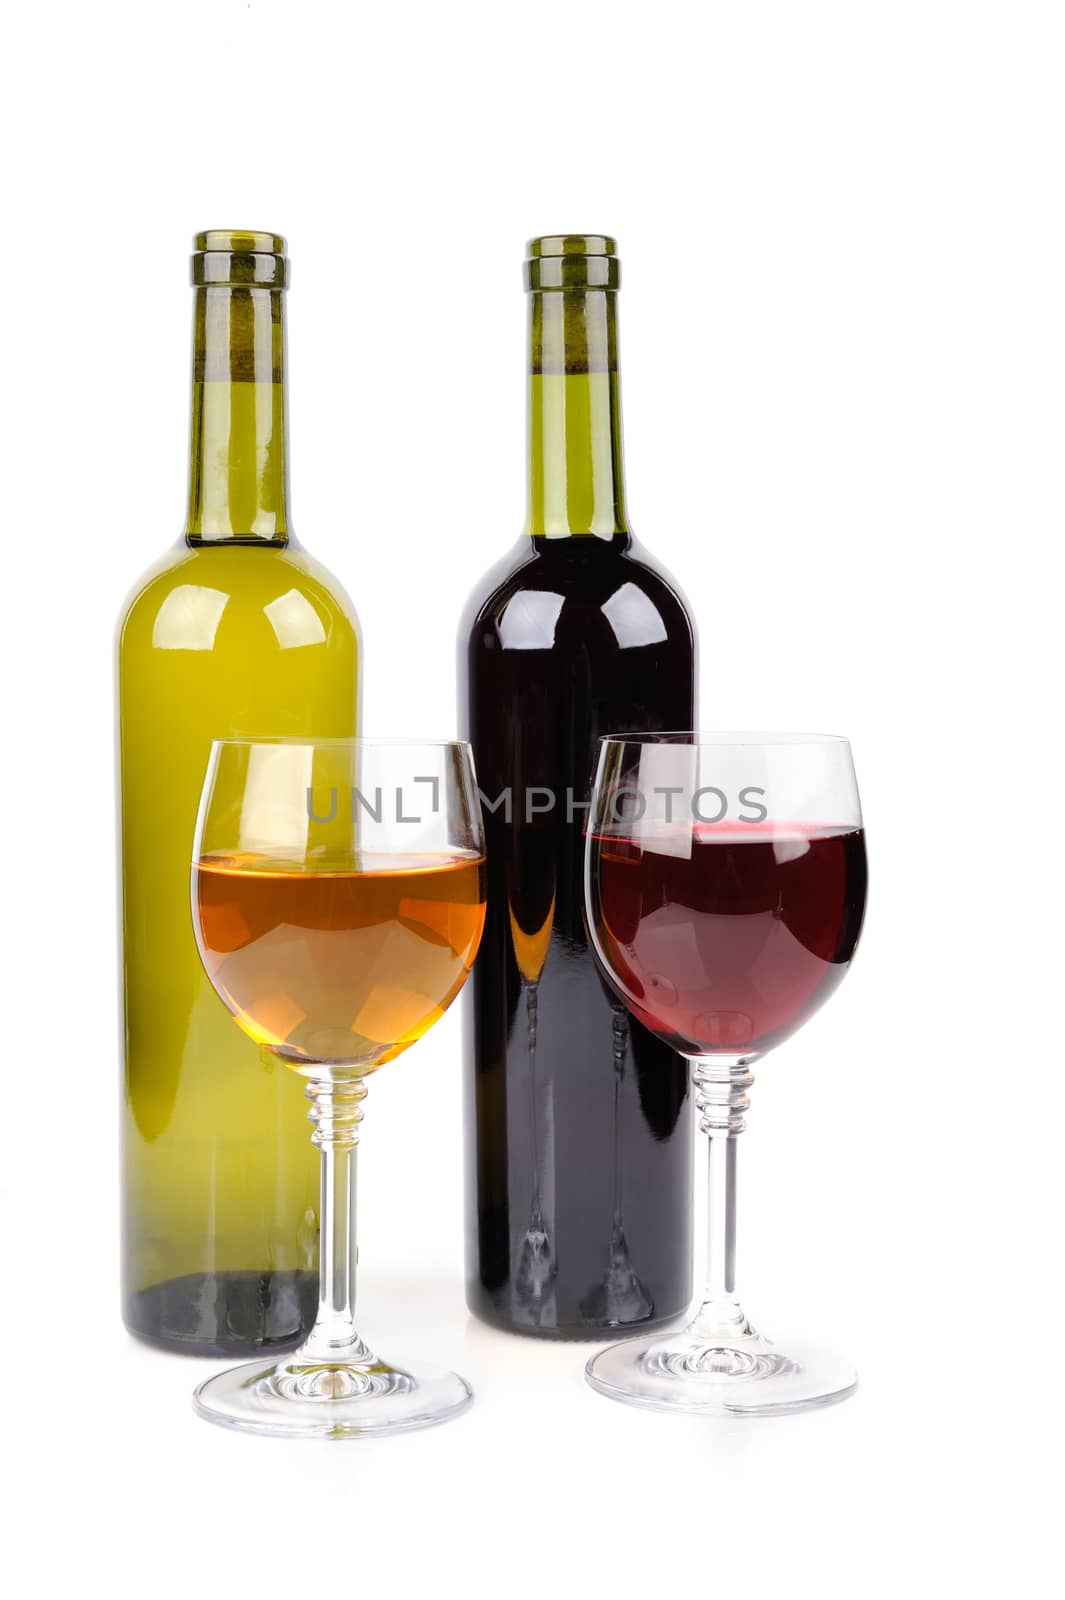 Wine glass and bottle of wine on white background